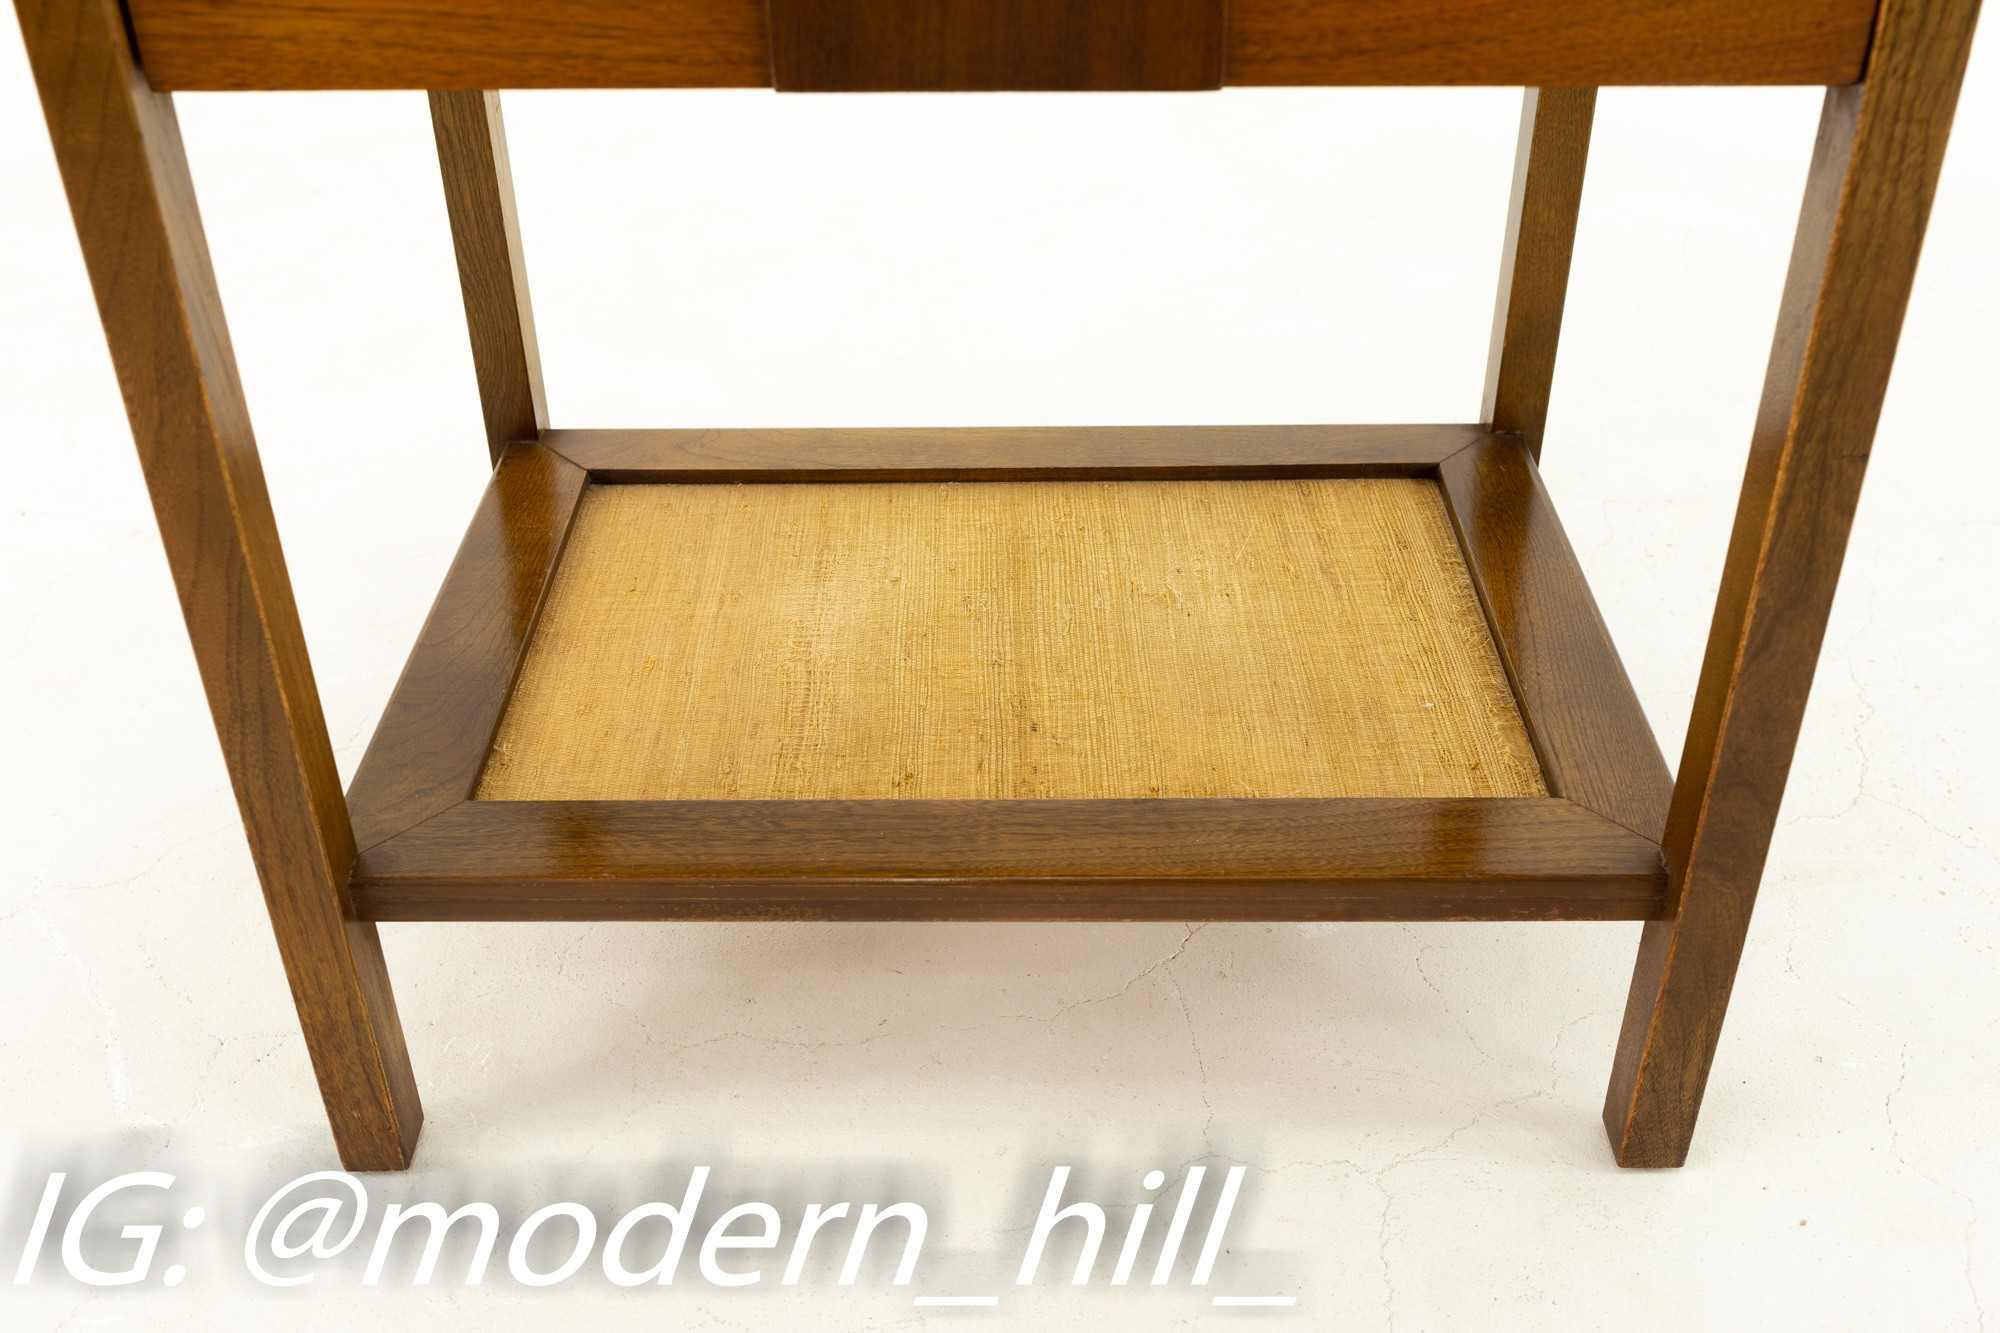 Paul Mccobb Style Mid Century Walnut Brass and Grasscloth Nightstand Side End Table